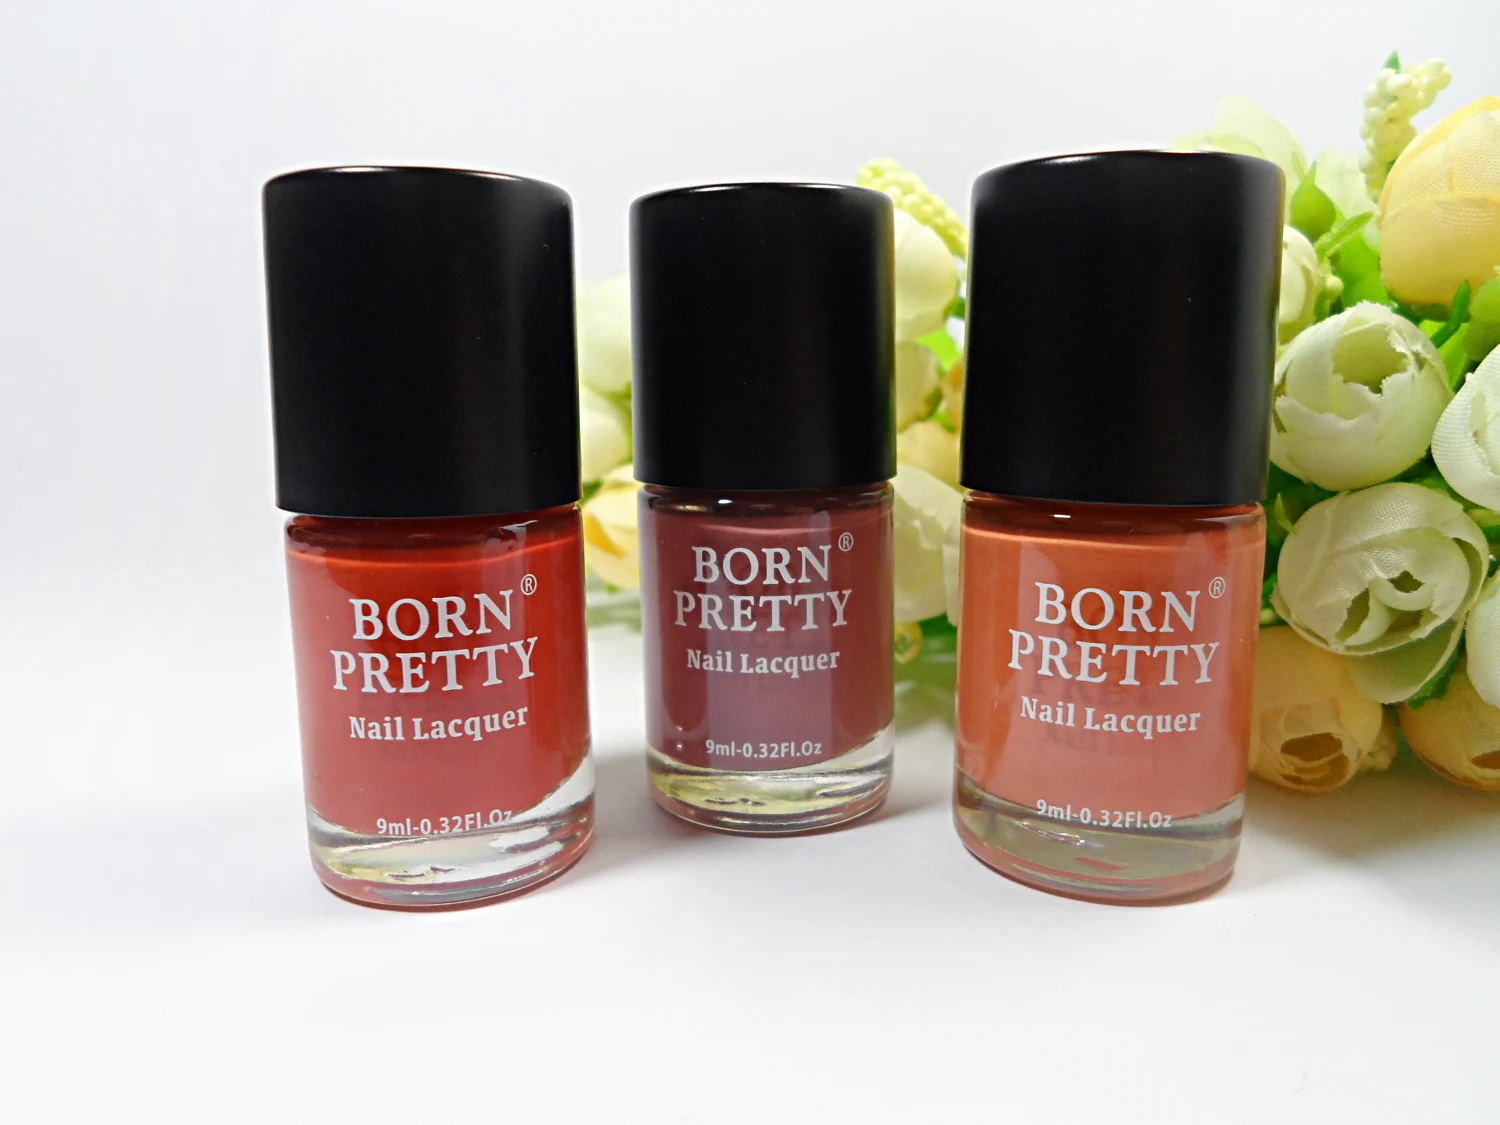 fall nail look with the pumpkin series nail polishes by born pretty